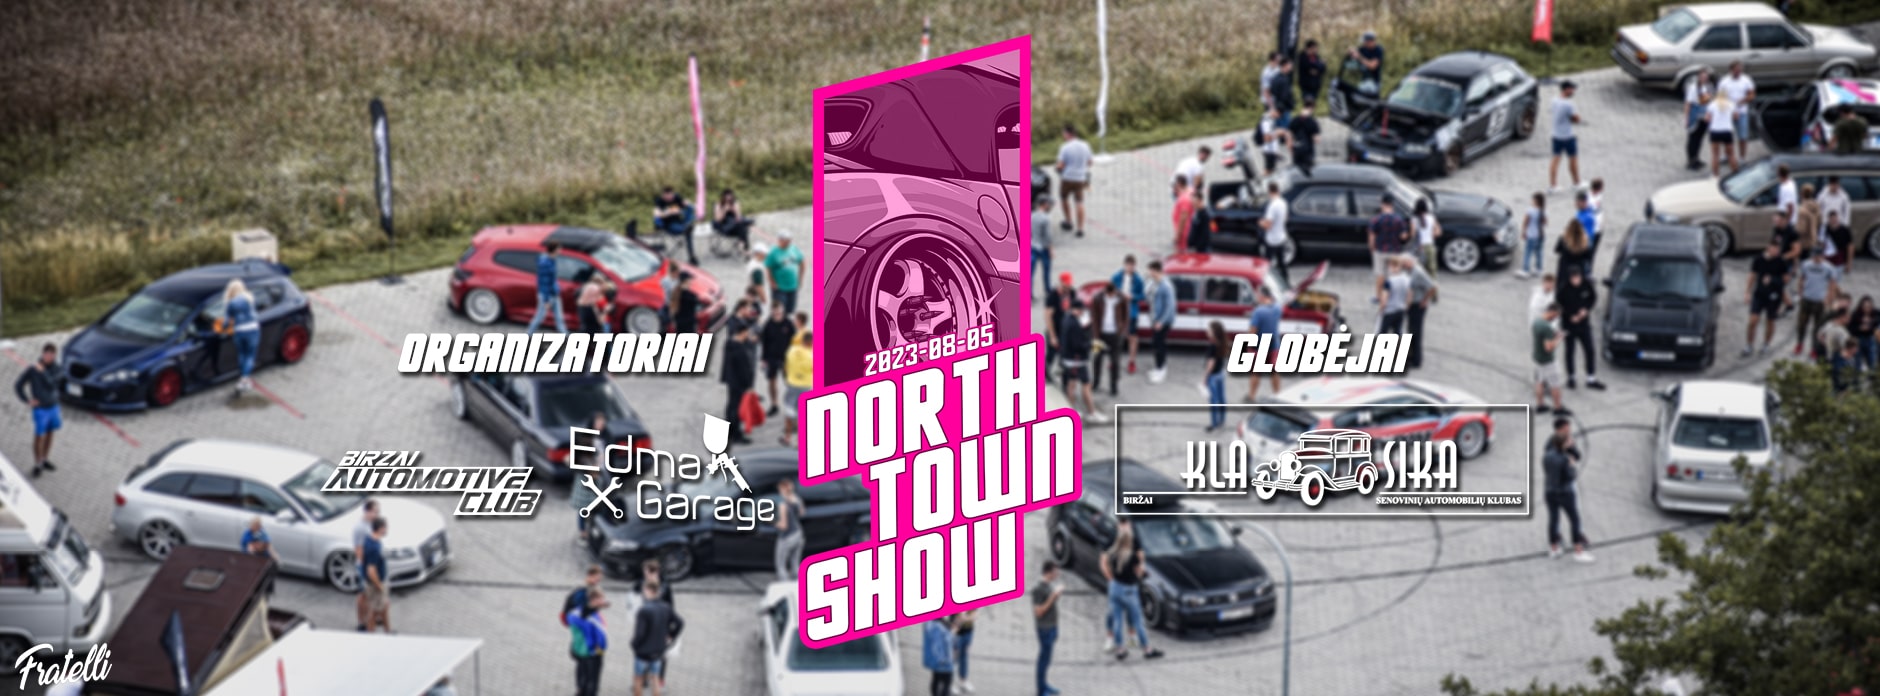 North Town Show '23